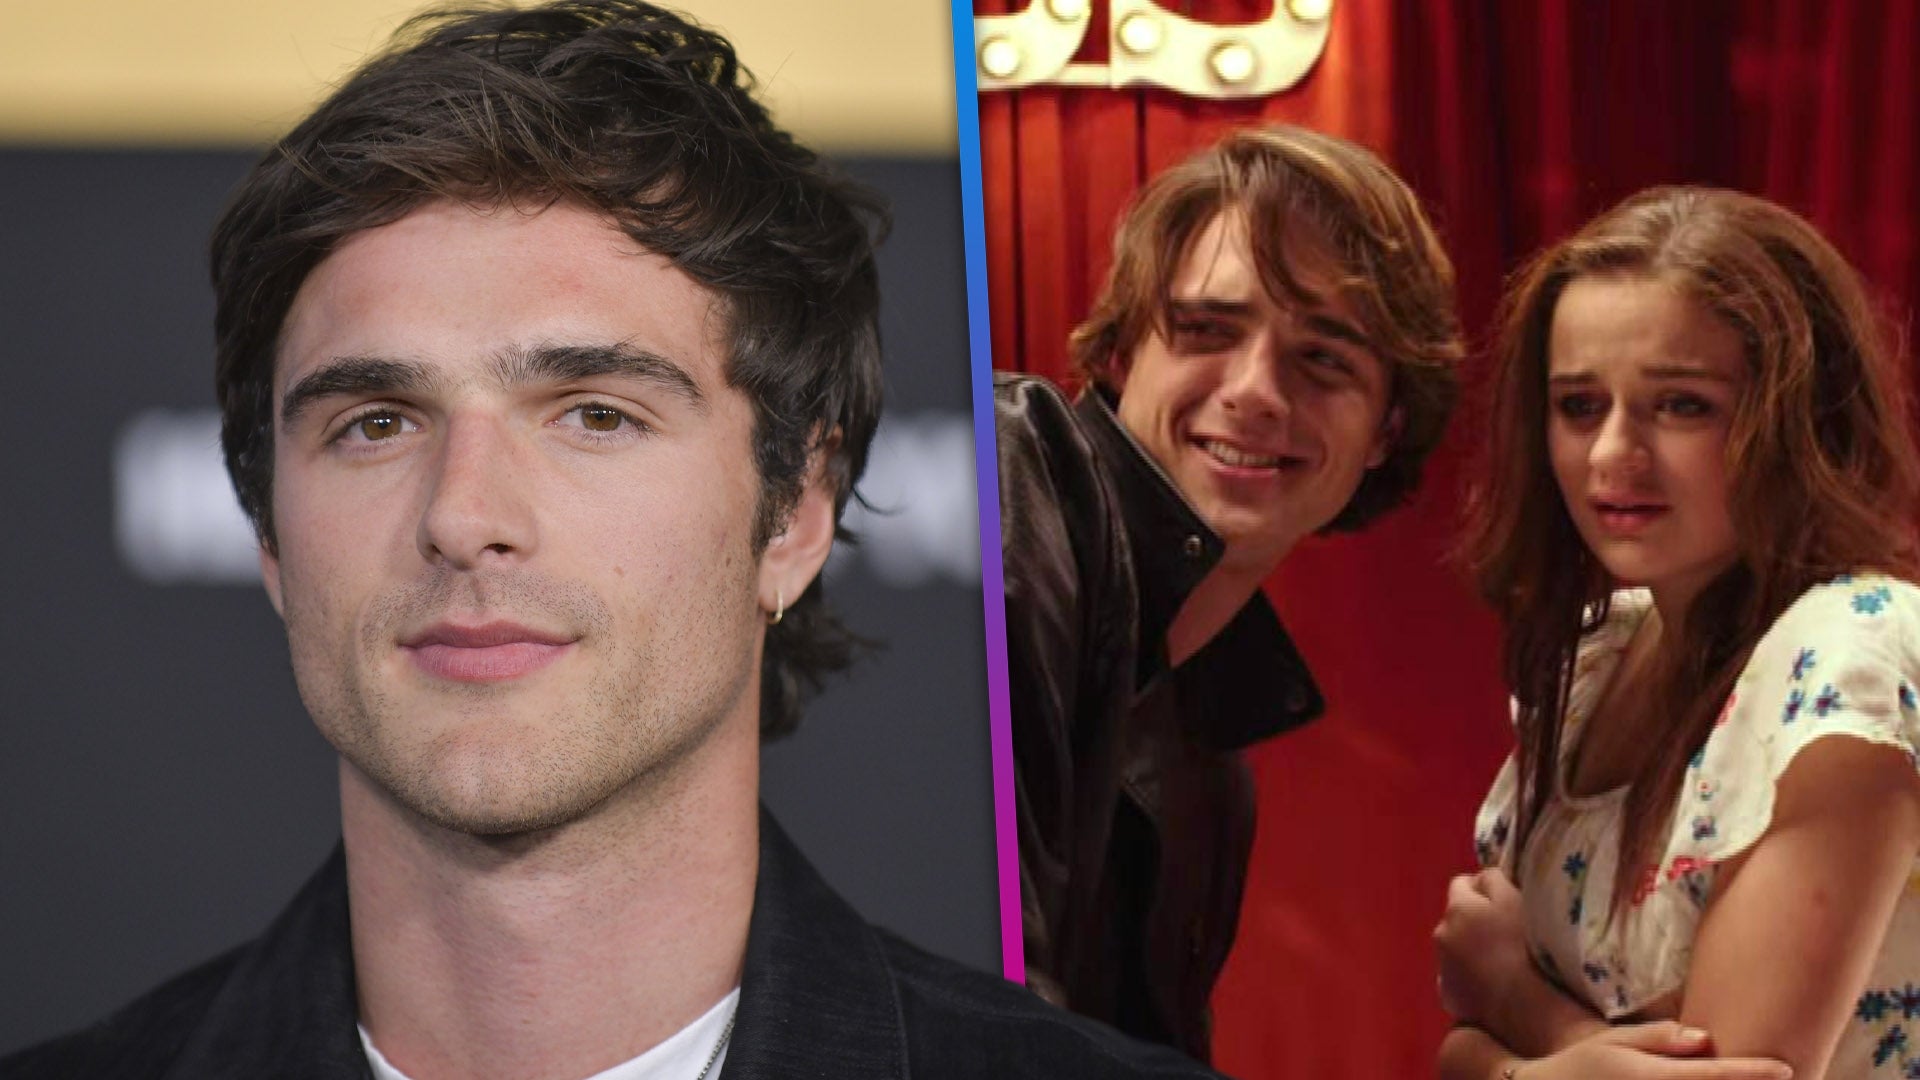 Jacob Elordi Wanted to Quit Acting After 'The Kissing Booth' Fame